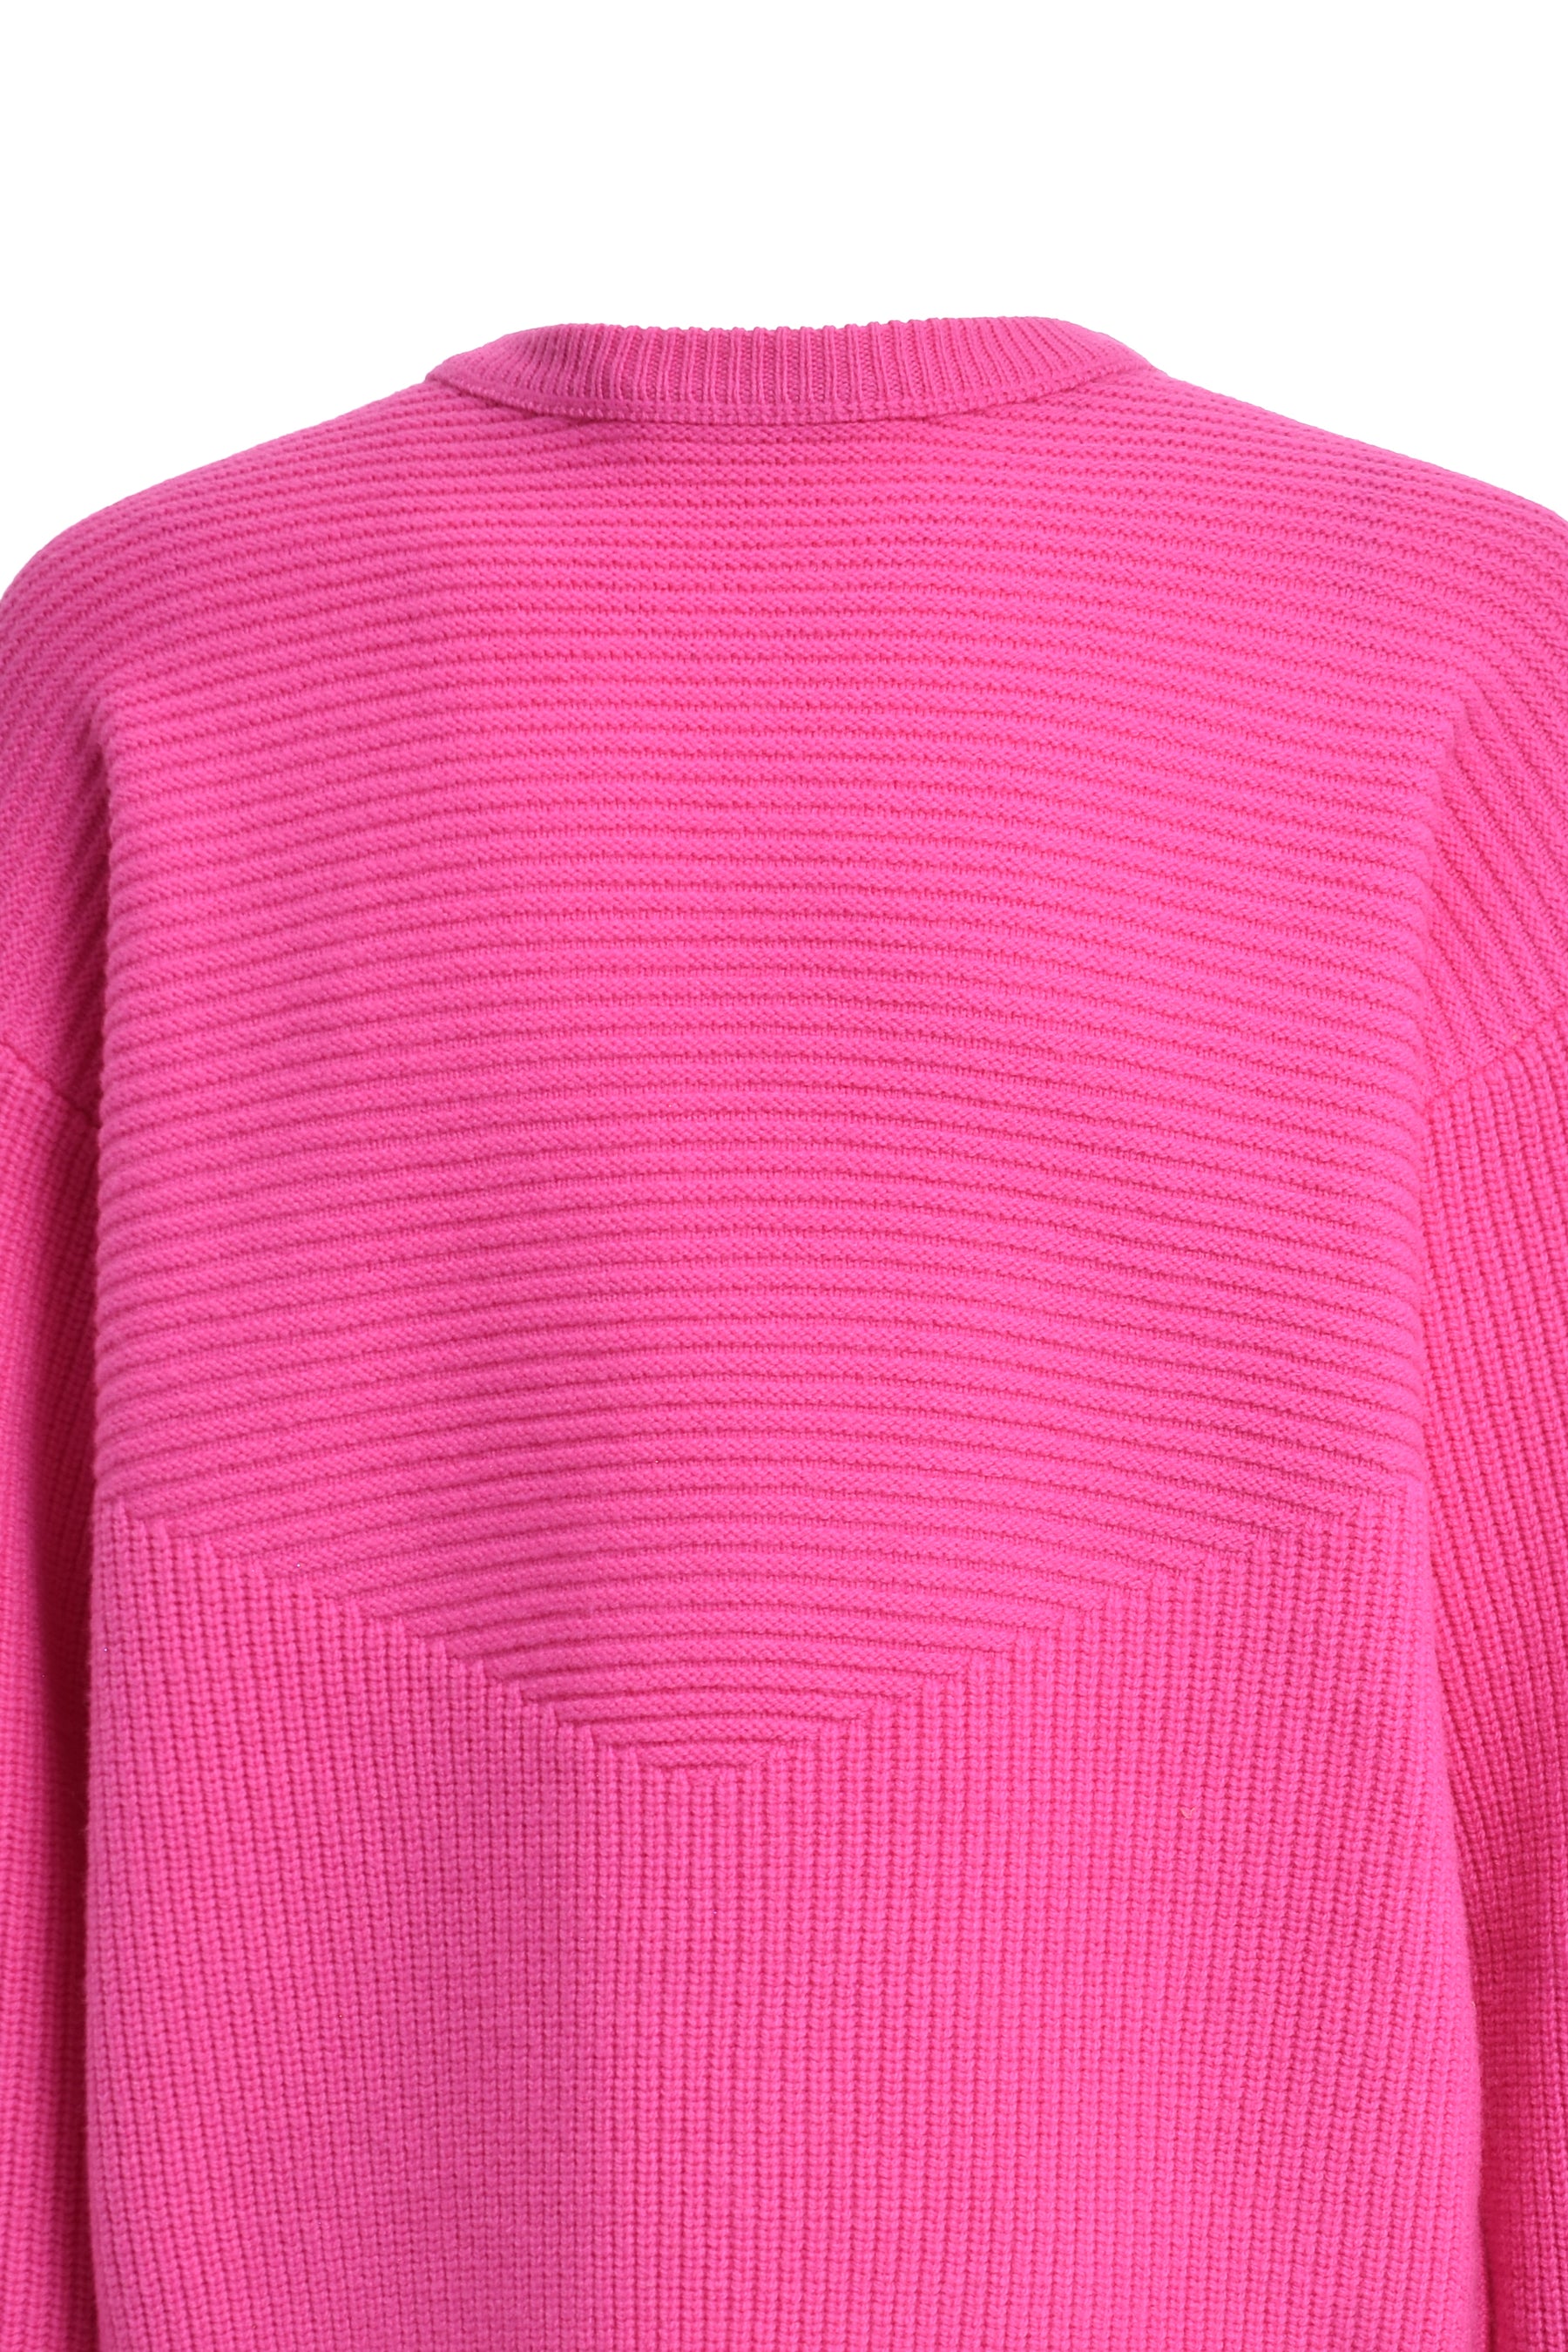 ROUTE KNIT SWEATER / PNK